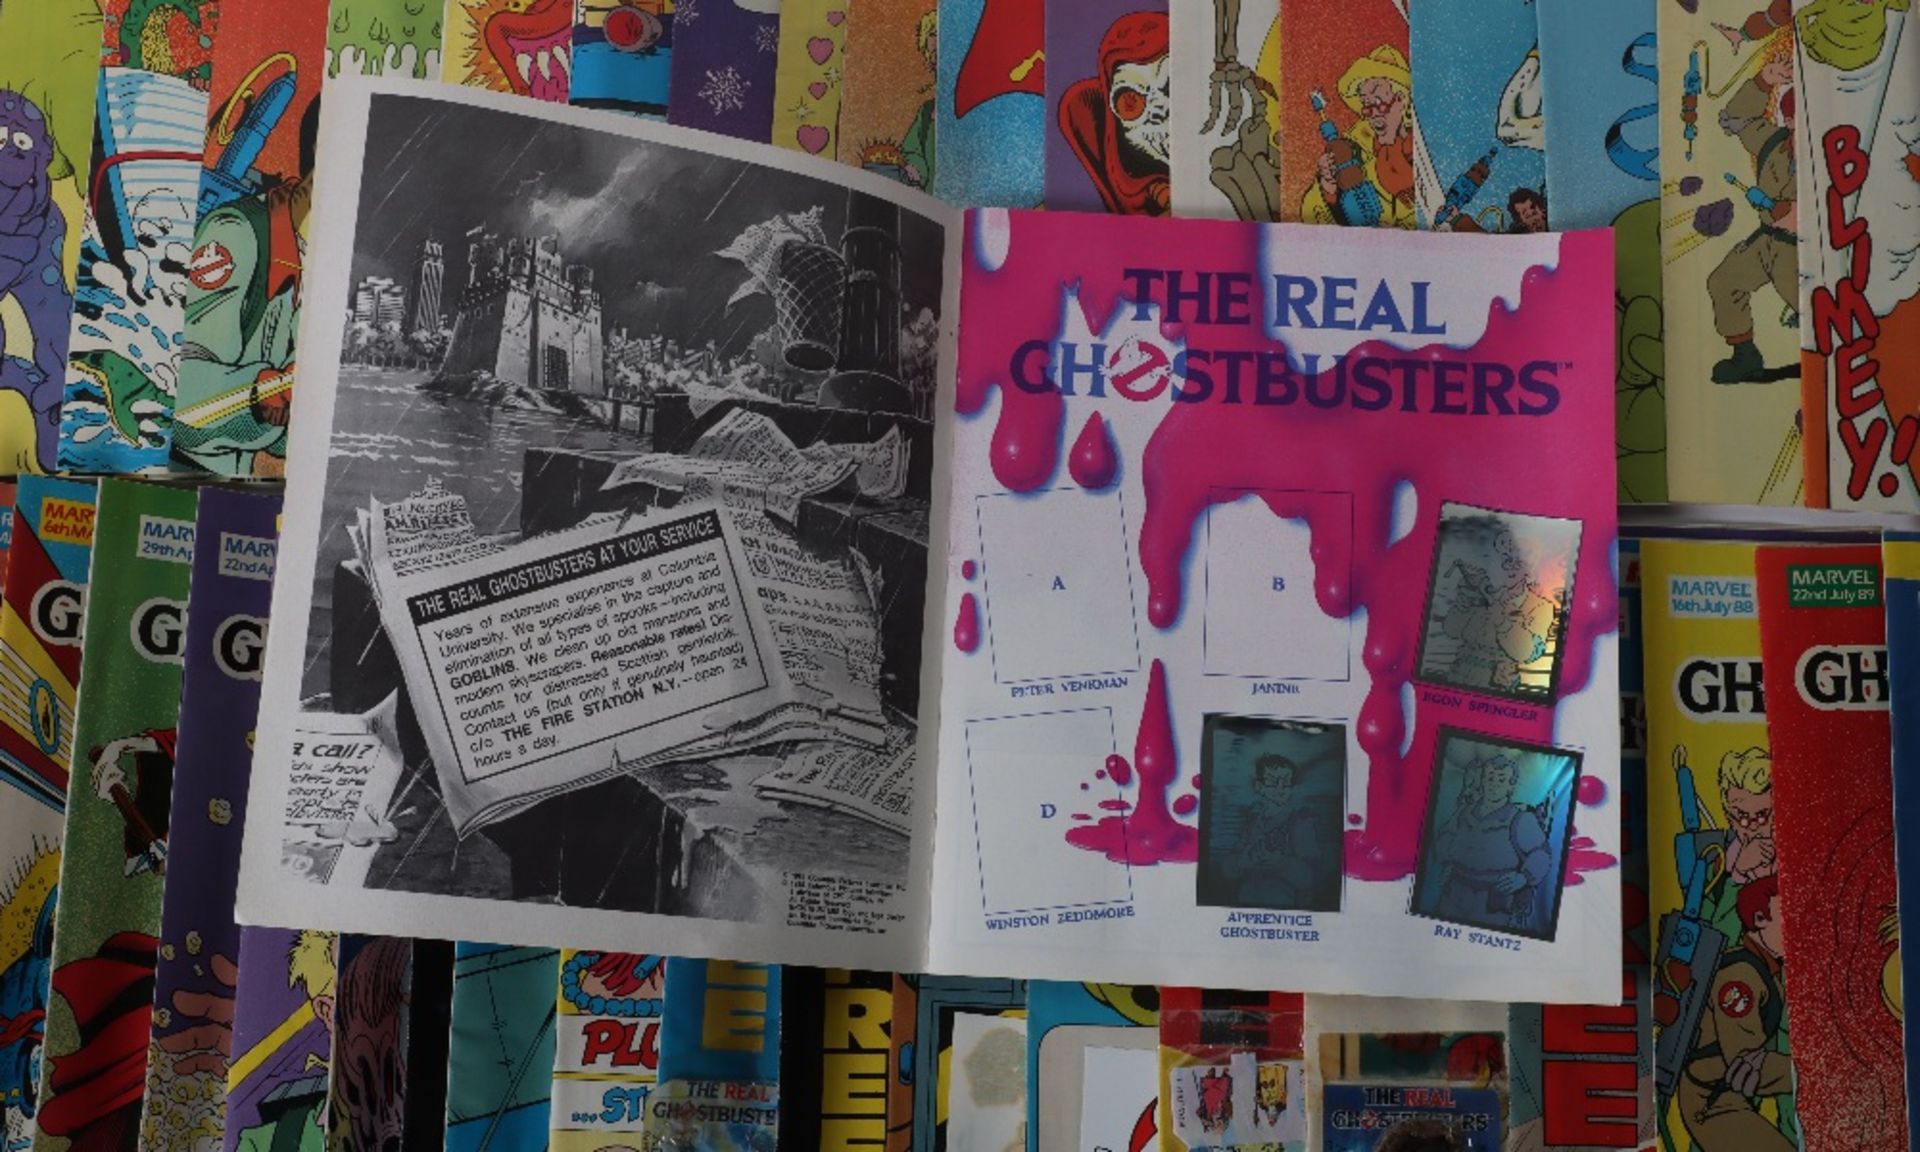 The Real Ghostbusters Panini sticker album and comics - Image 2 of 4